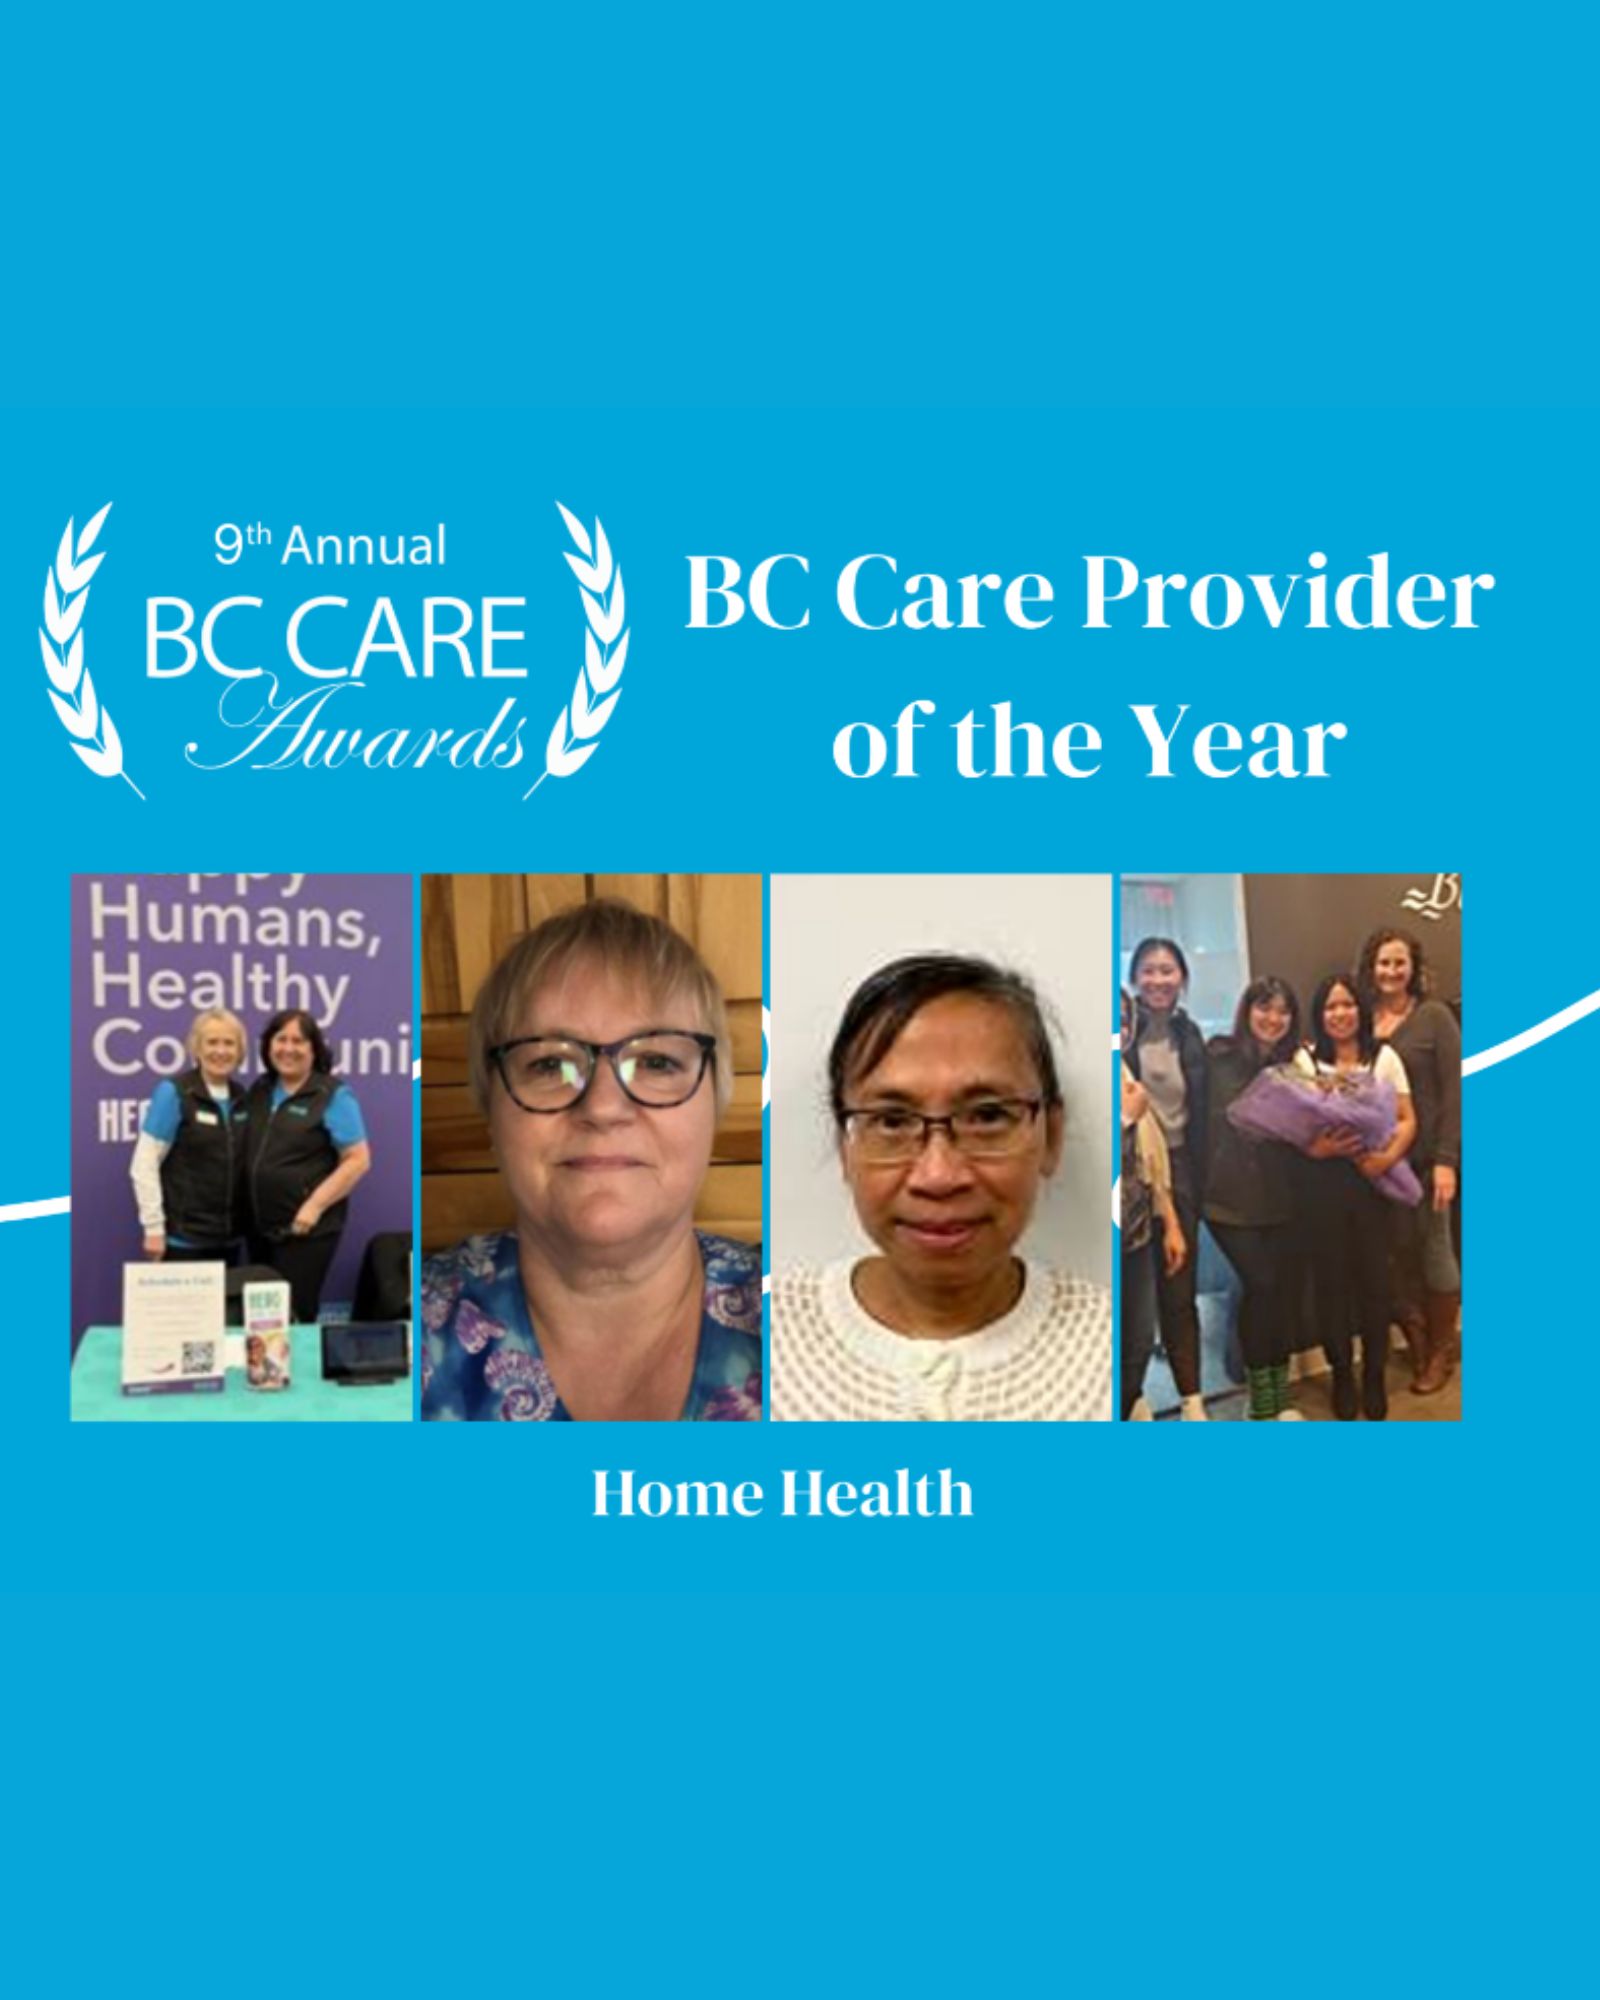 Prince George Healthcare Worker Jeannette Receives Recognition!